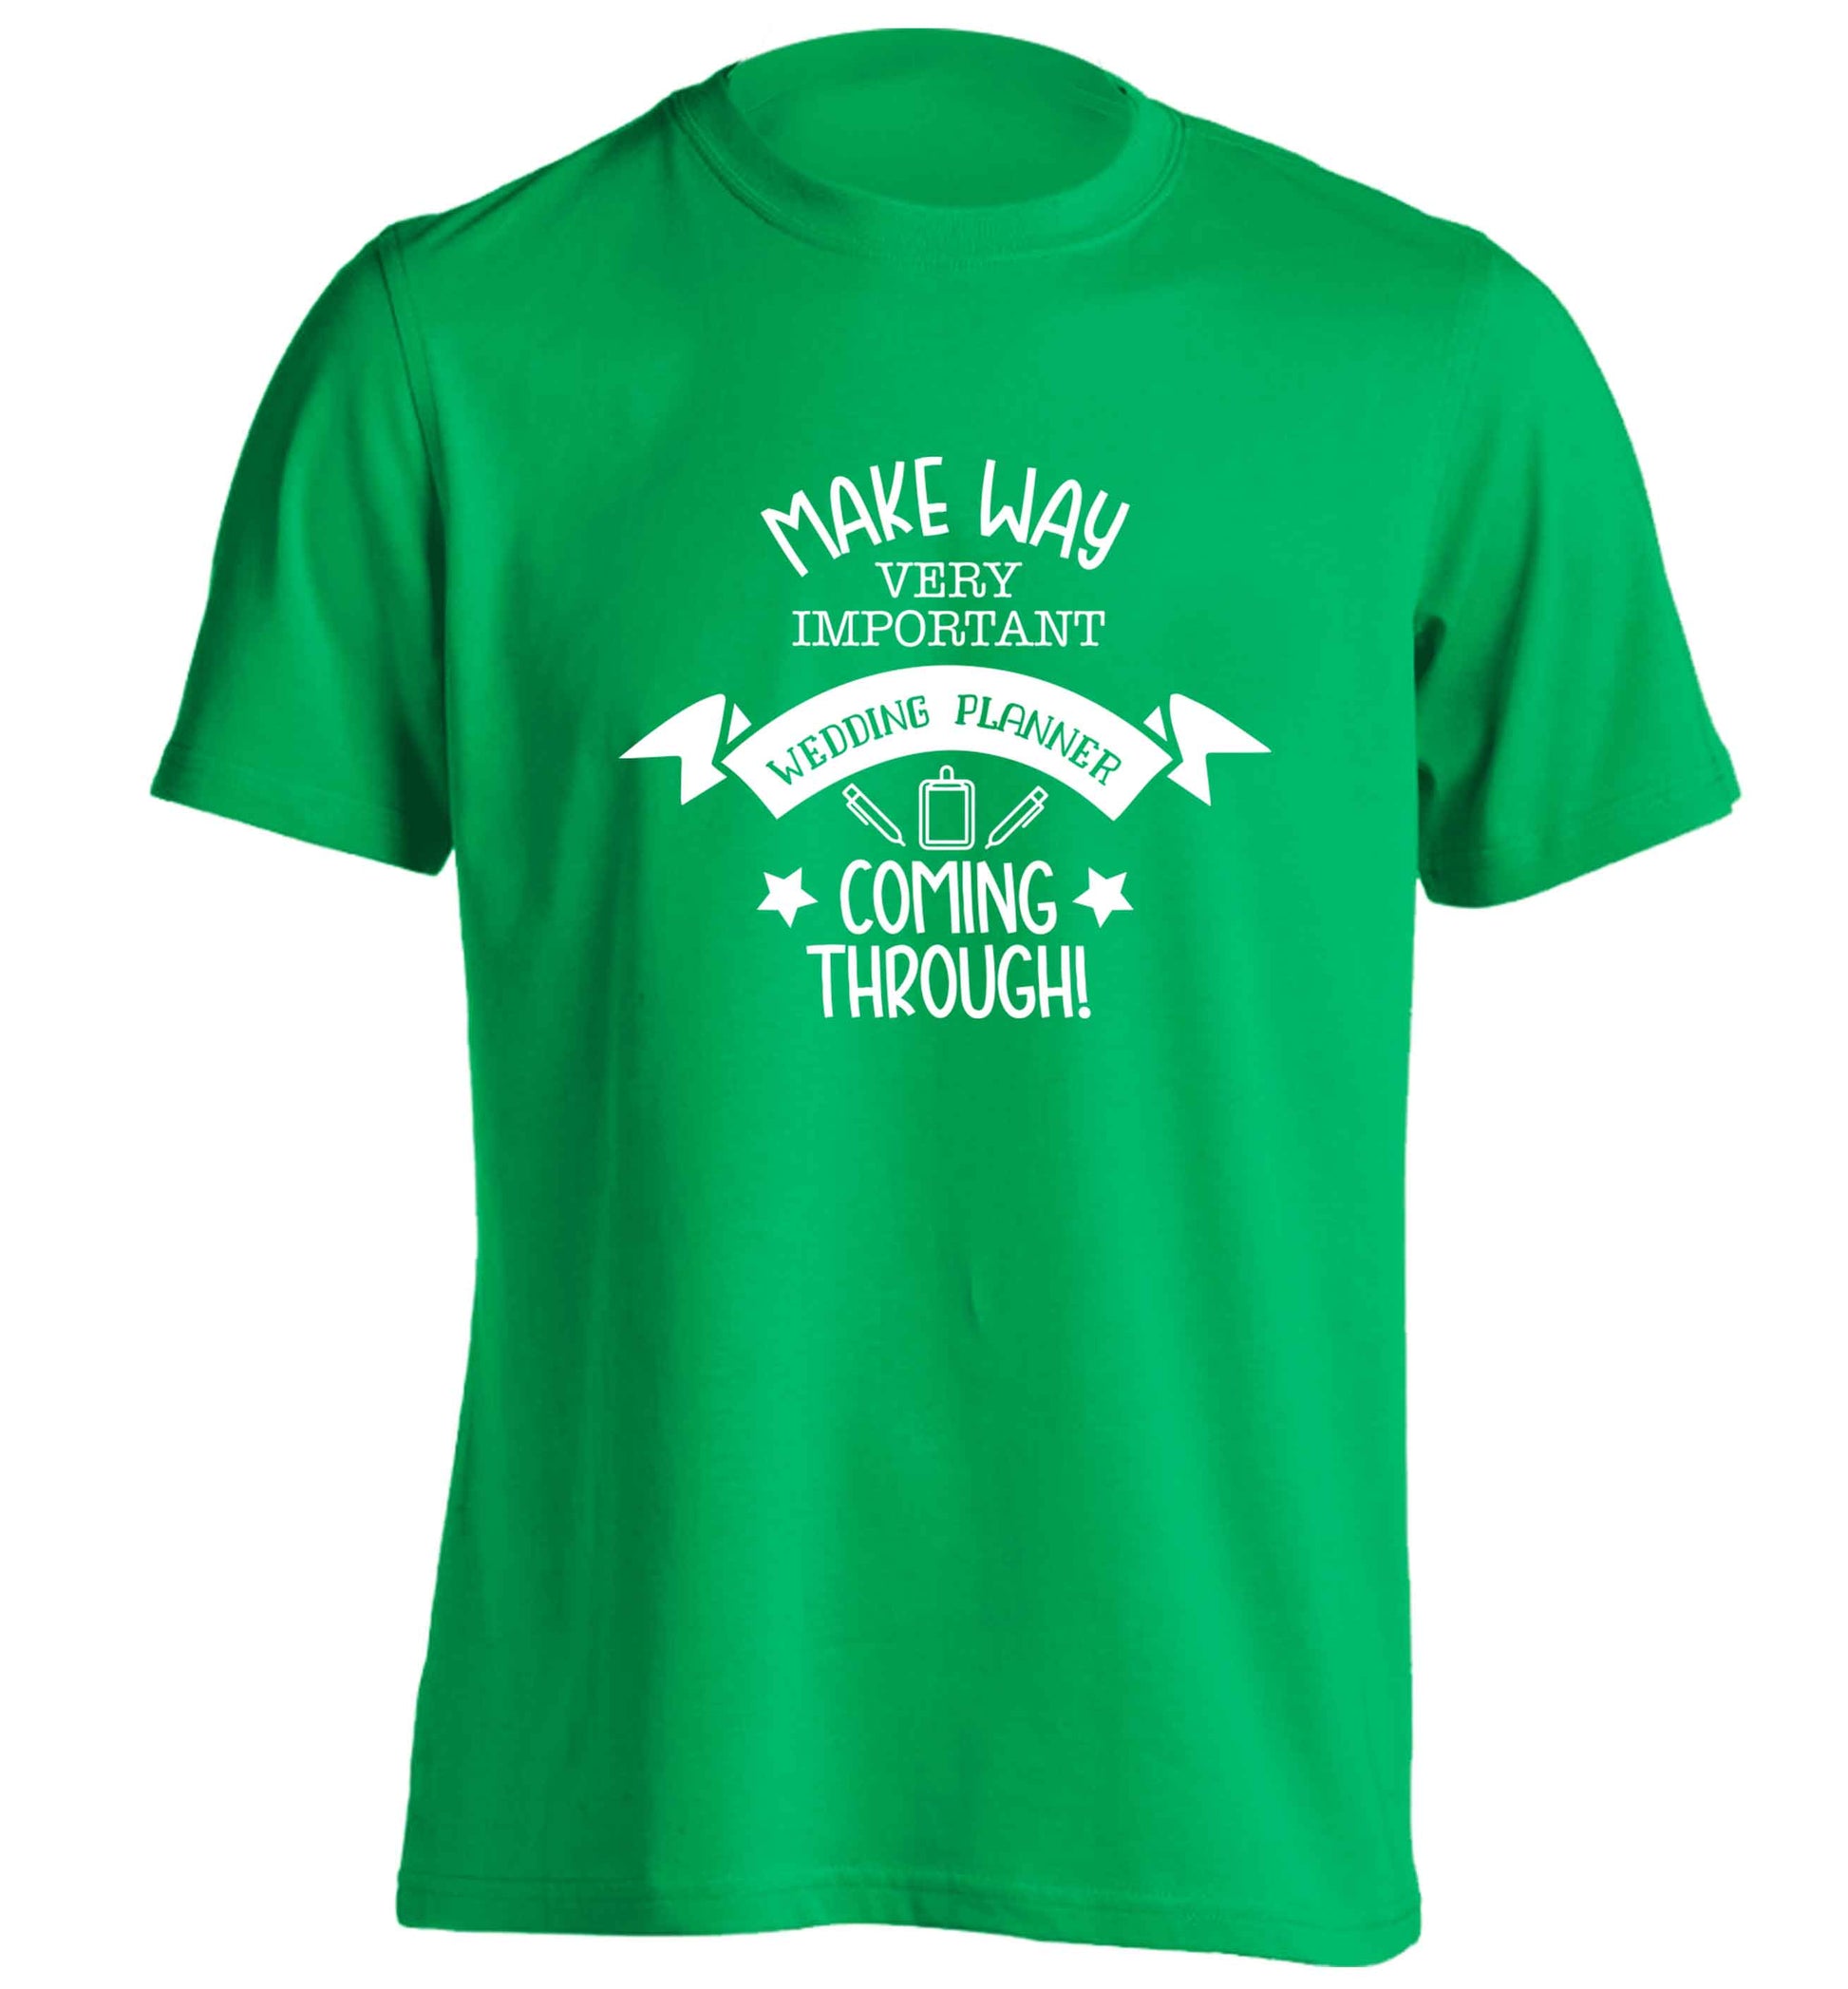 Make way very important wedding planner coming through adults unisex green Tshirt 2XL